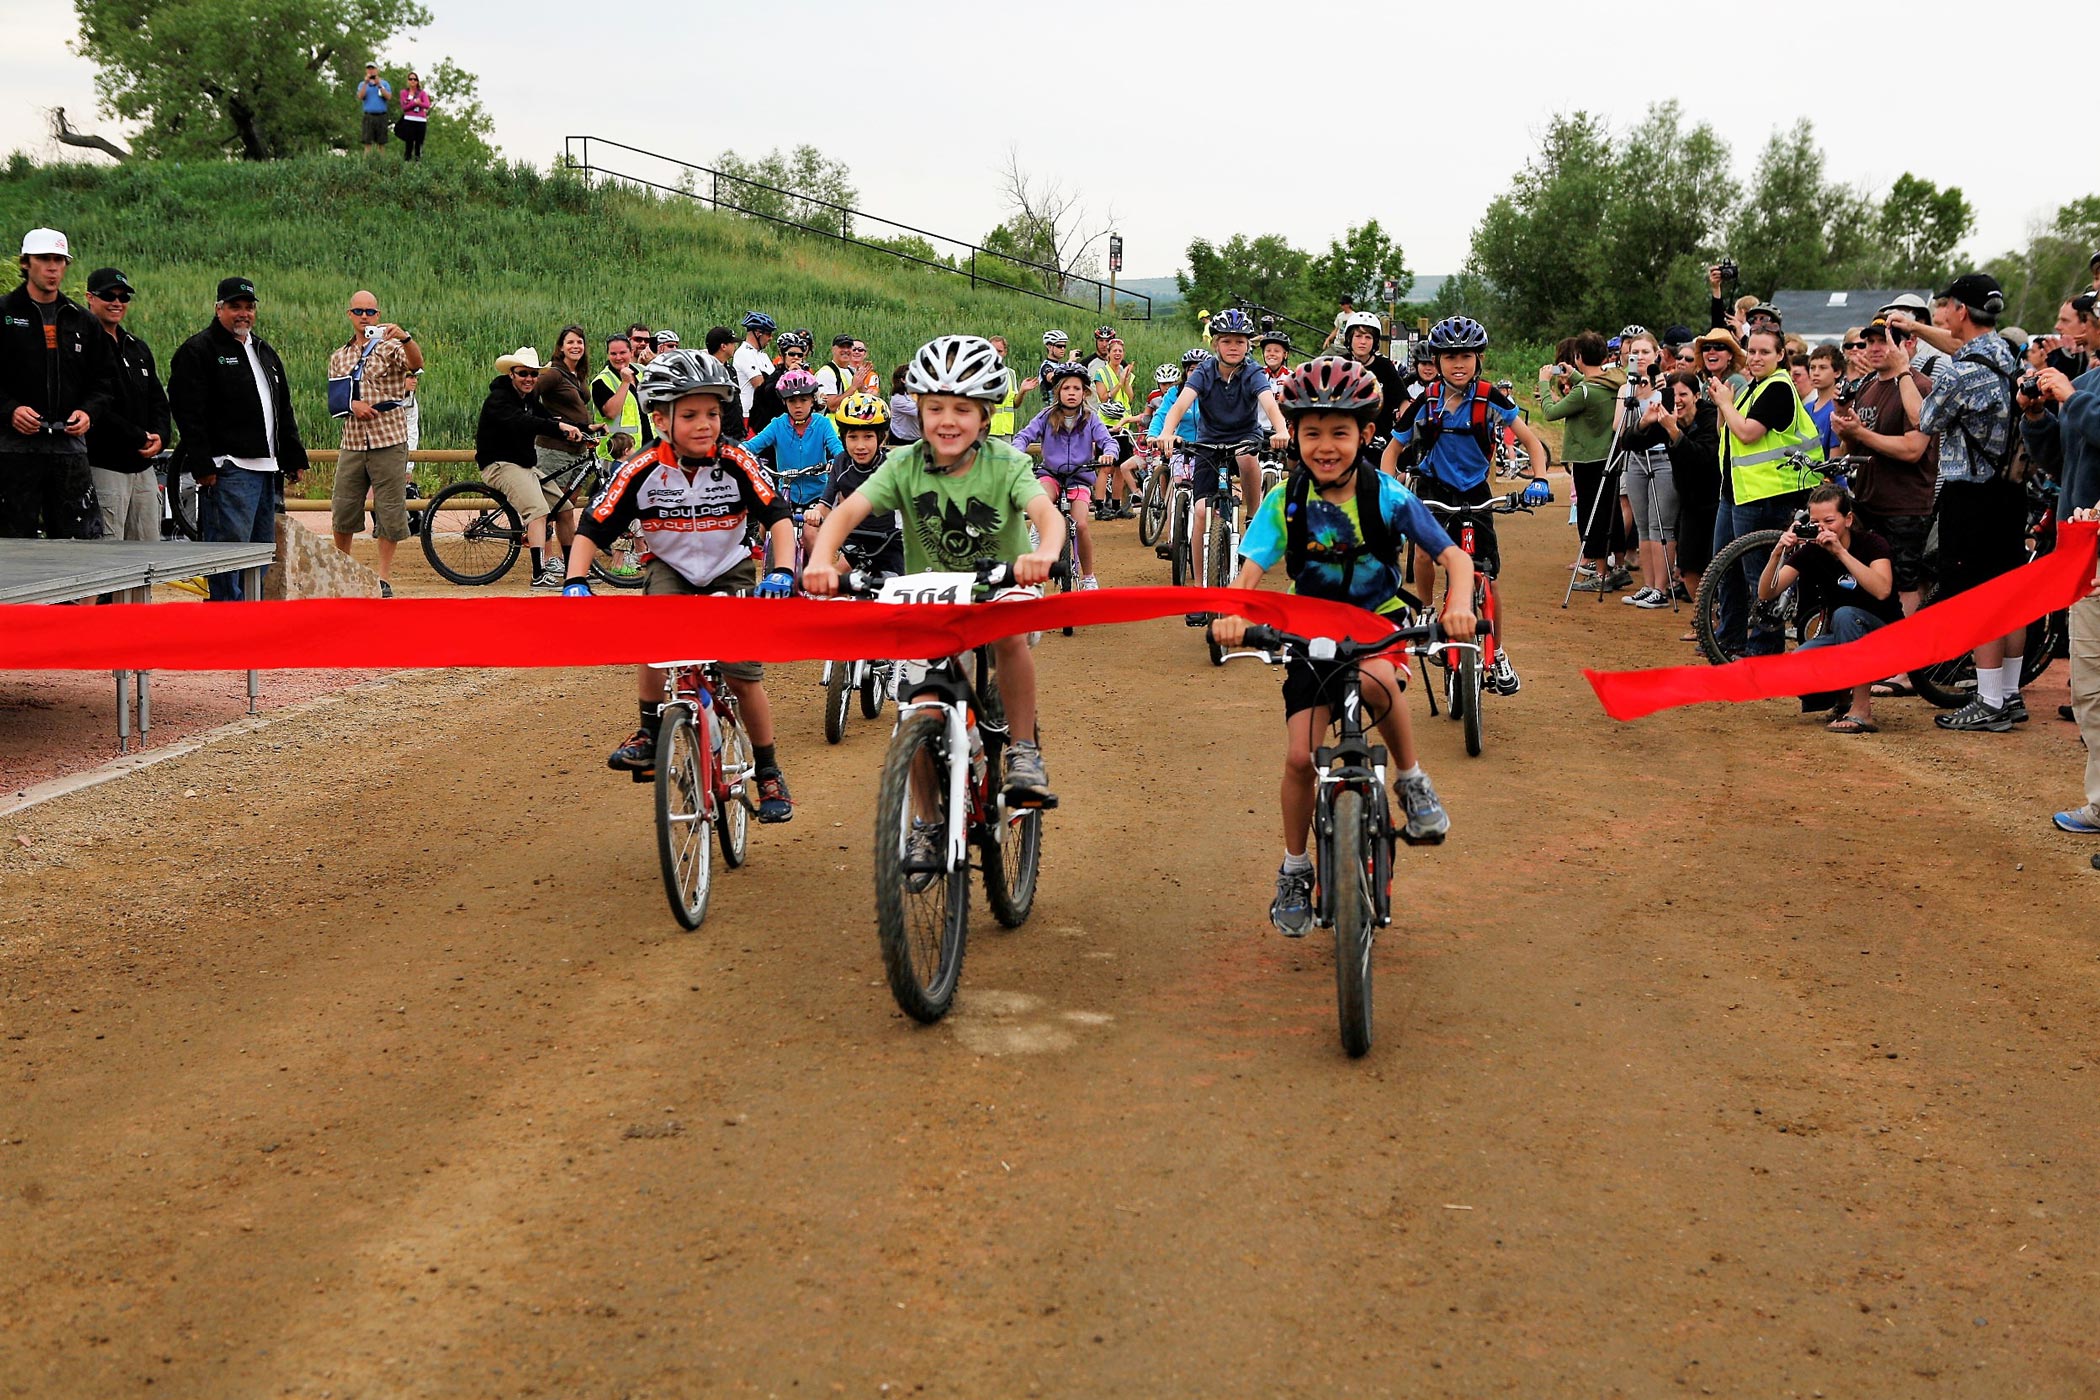 Youth bike racers crossing finish line